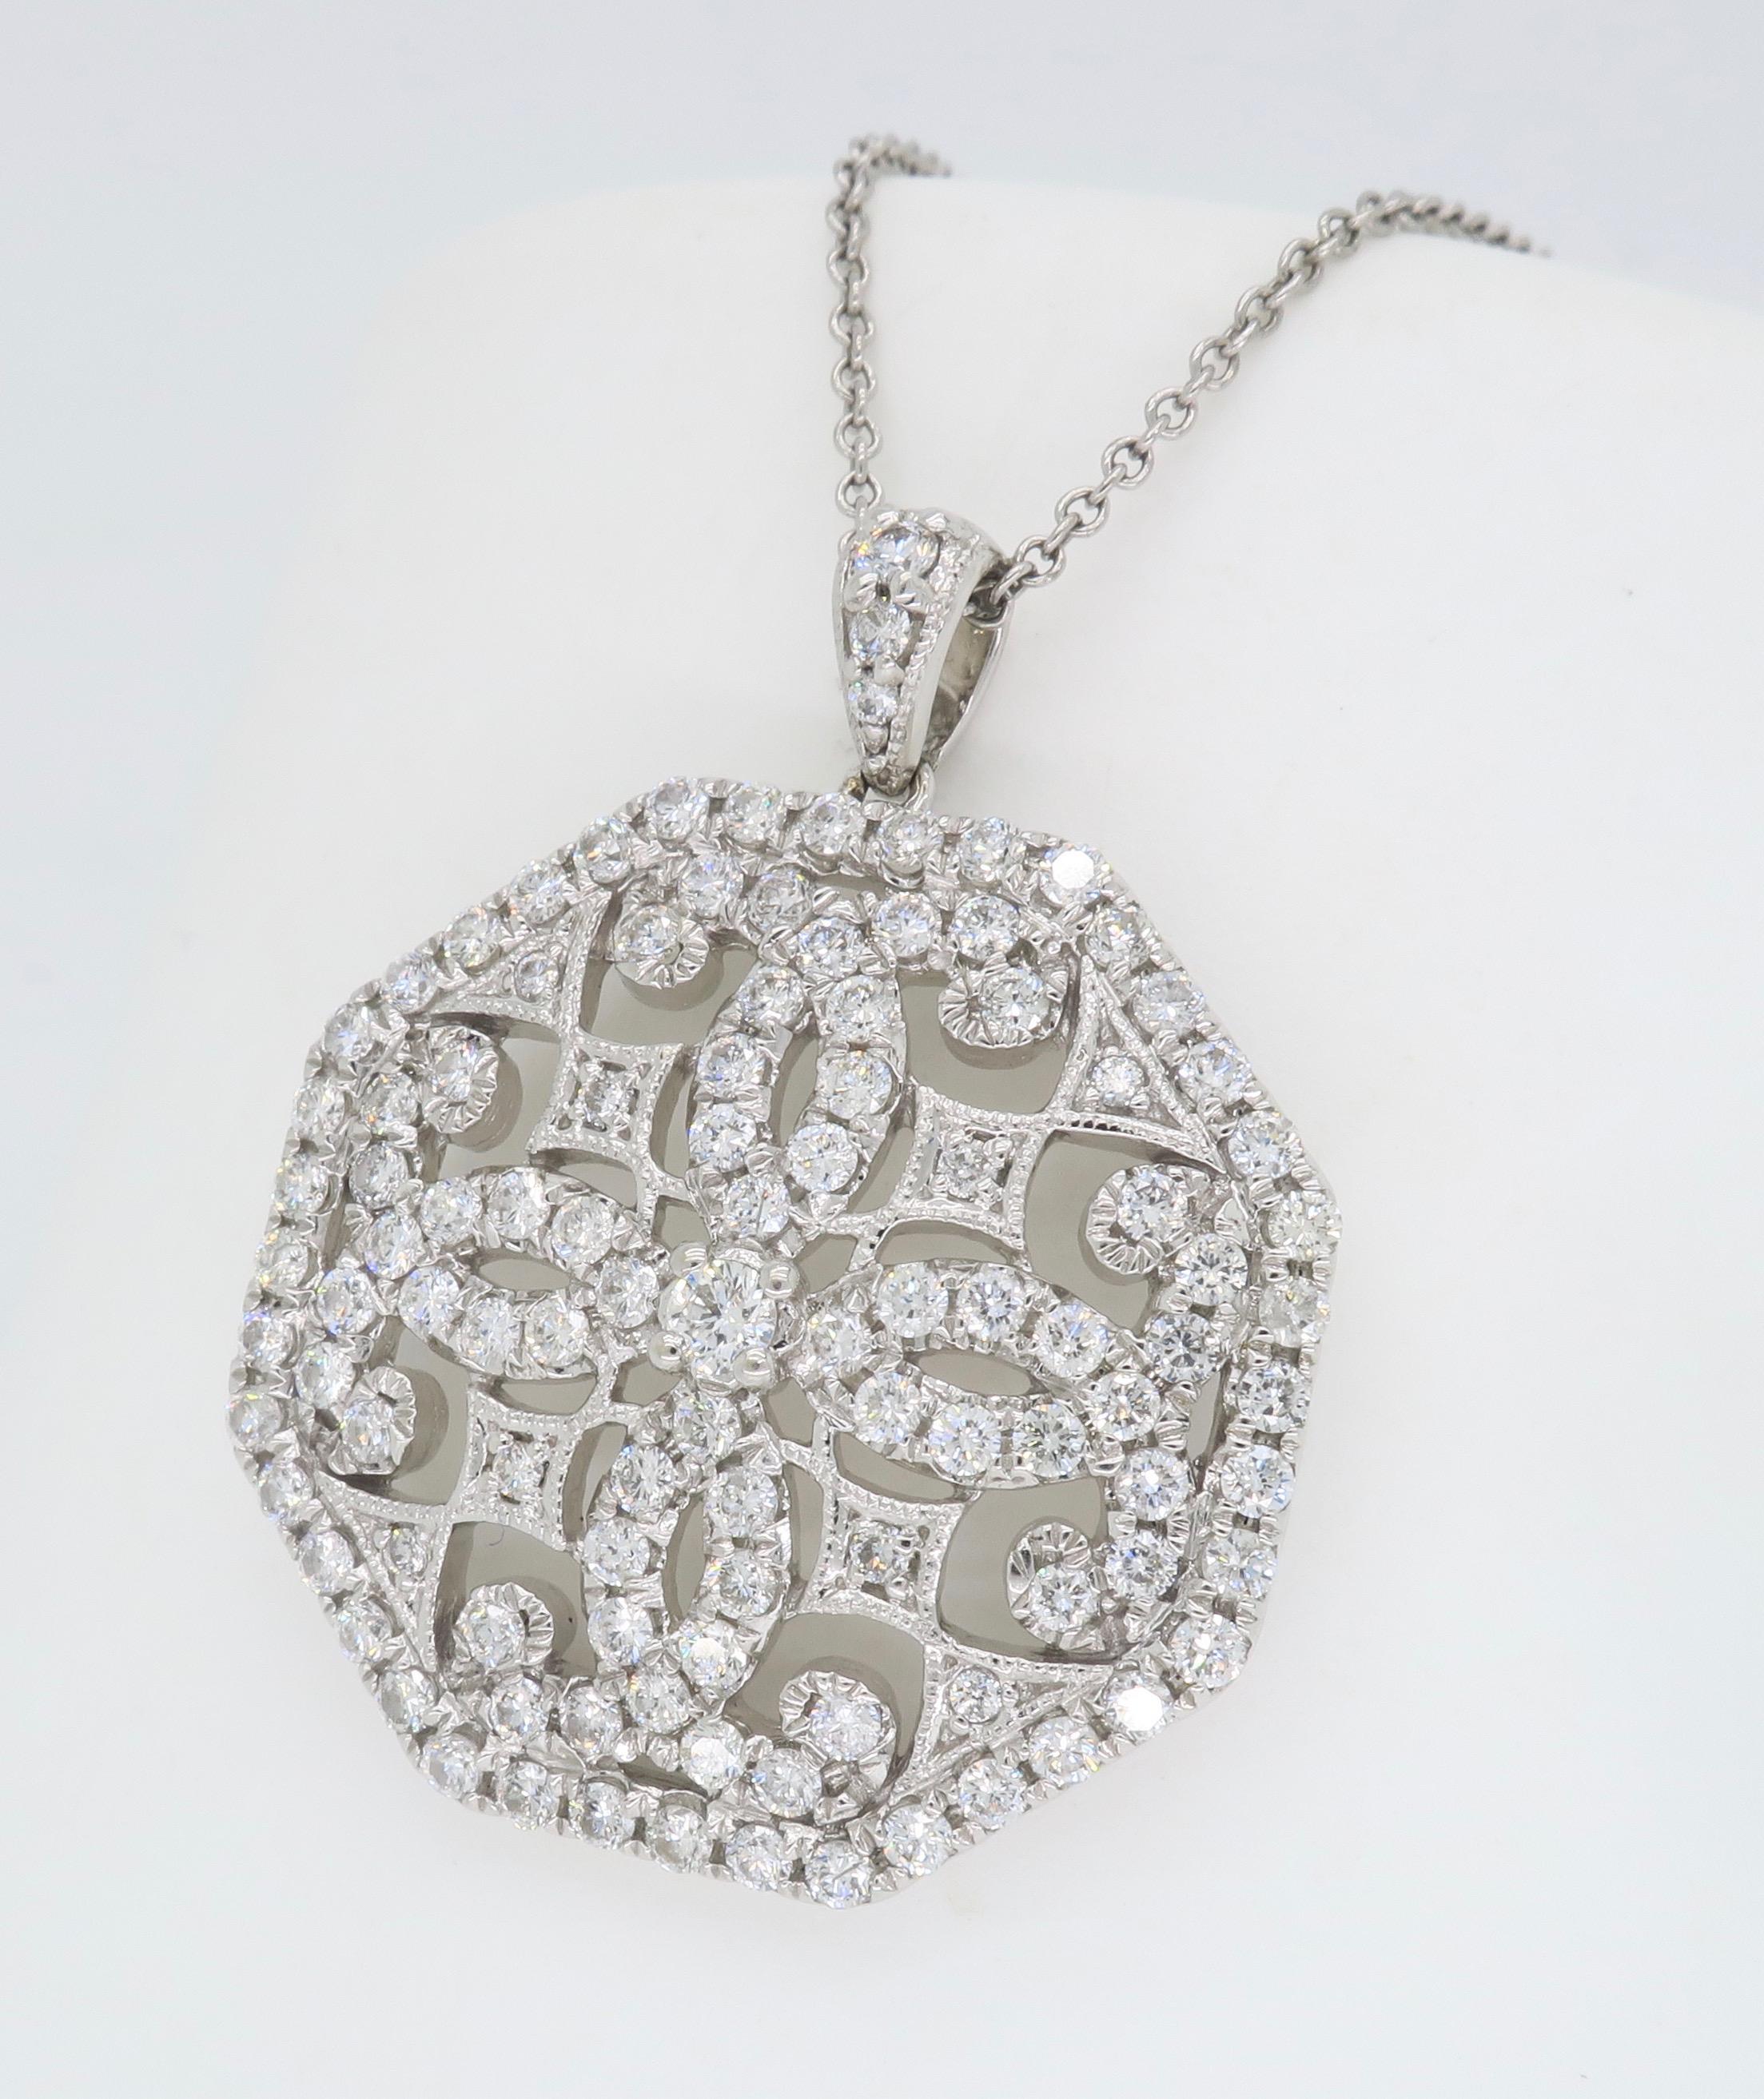 Vintage inspired diamond medallion style necklace set in 14k white gold.

Total Diamond Carat Weight:  Approximately 1.64CTW
Diamond Cut: Round Brilliant Cut
Color: Average G-I
Clarity: Average VS-SI
Metal: 14K White Gold
Marked/Tested: Stamped “14K